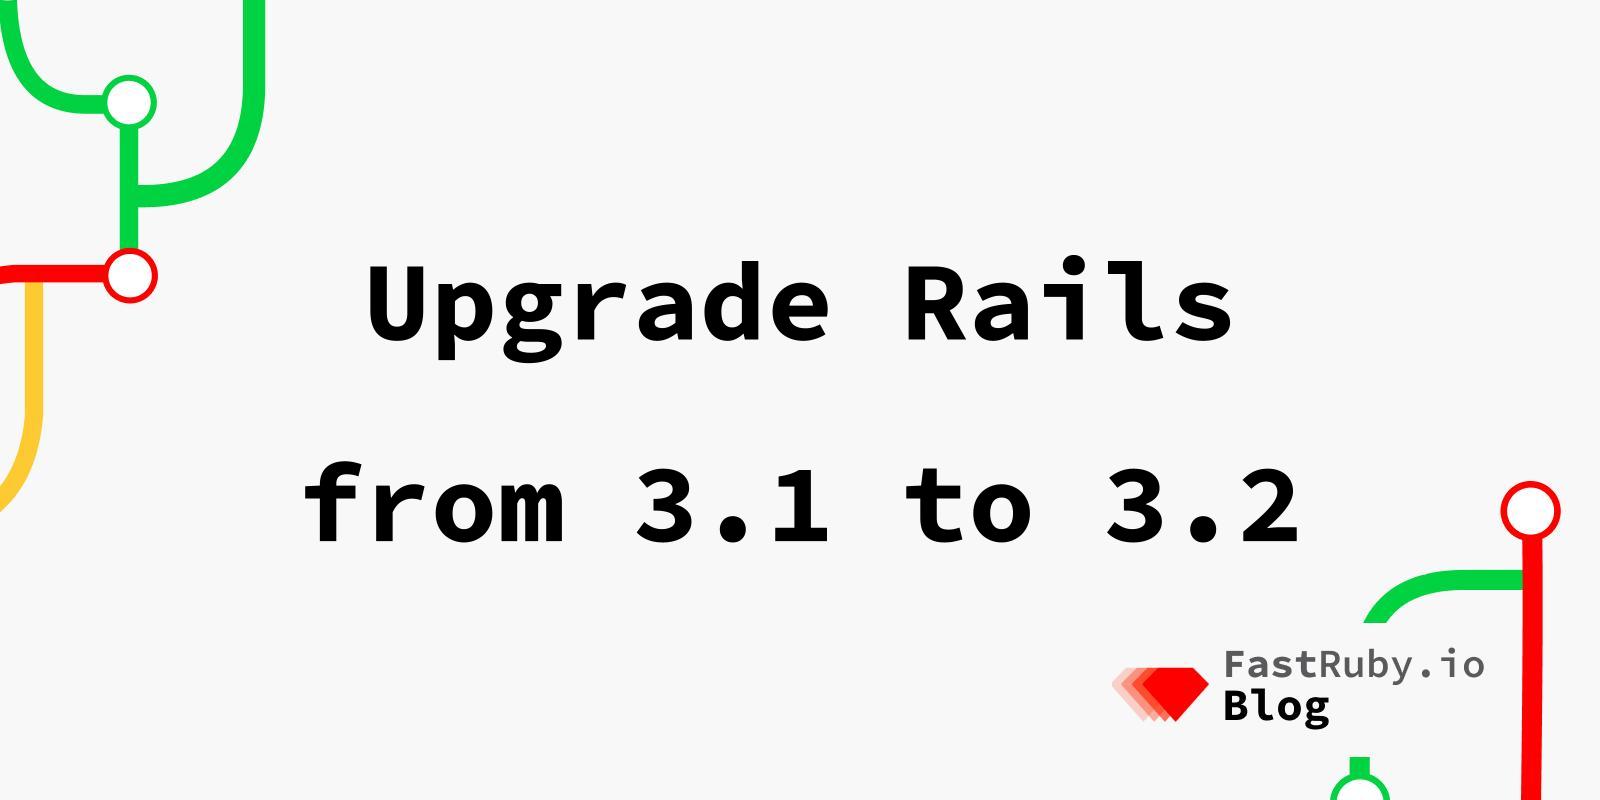 Upgrade Rails from 3.1 to 3.2